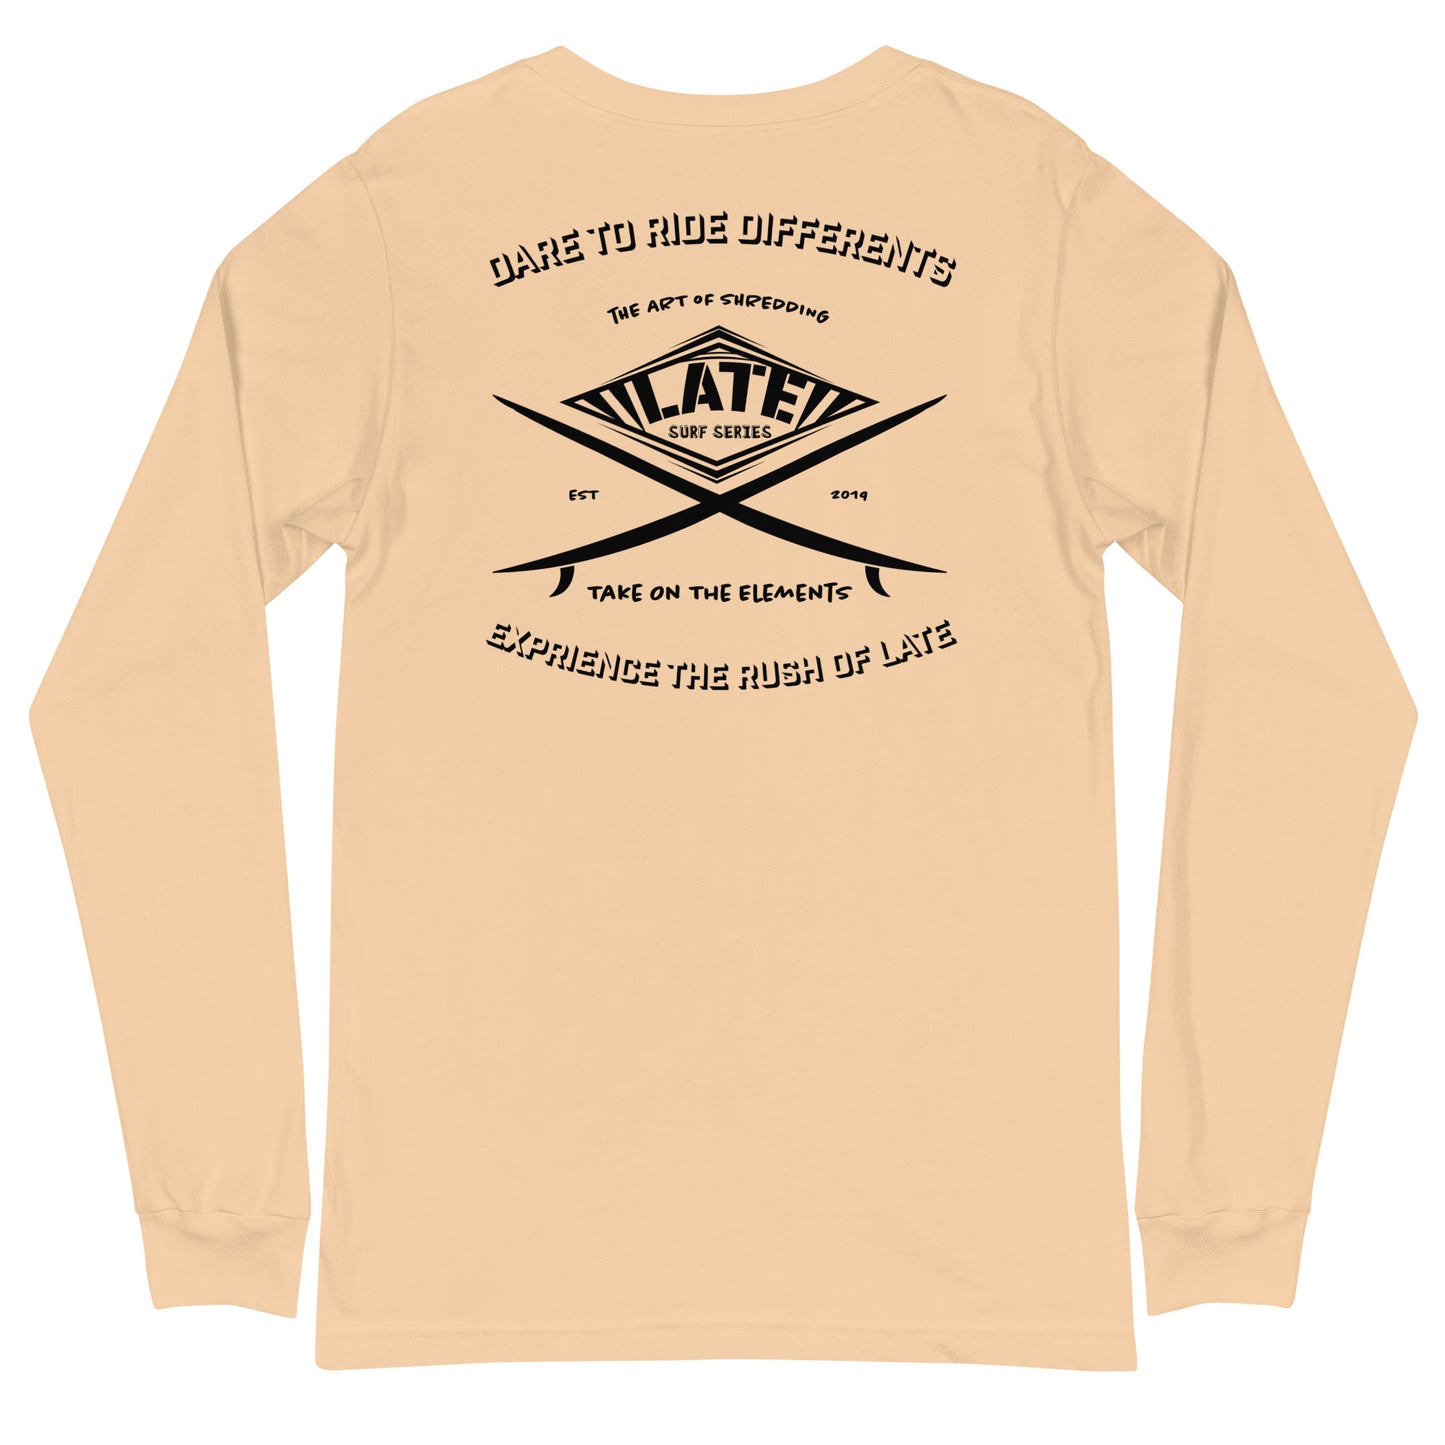 Long Sleeve surf vintage Take On The Elements Logo Late surf series, texte dare to ride differents couleur sable